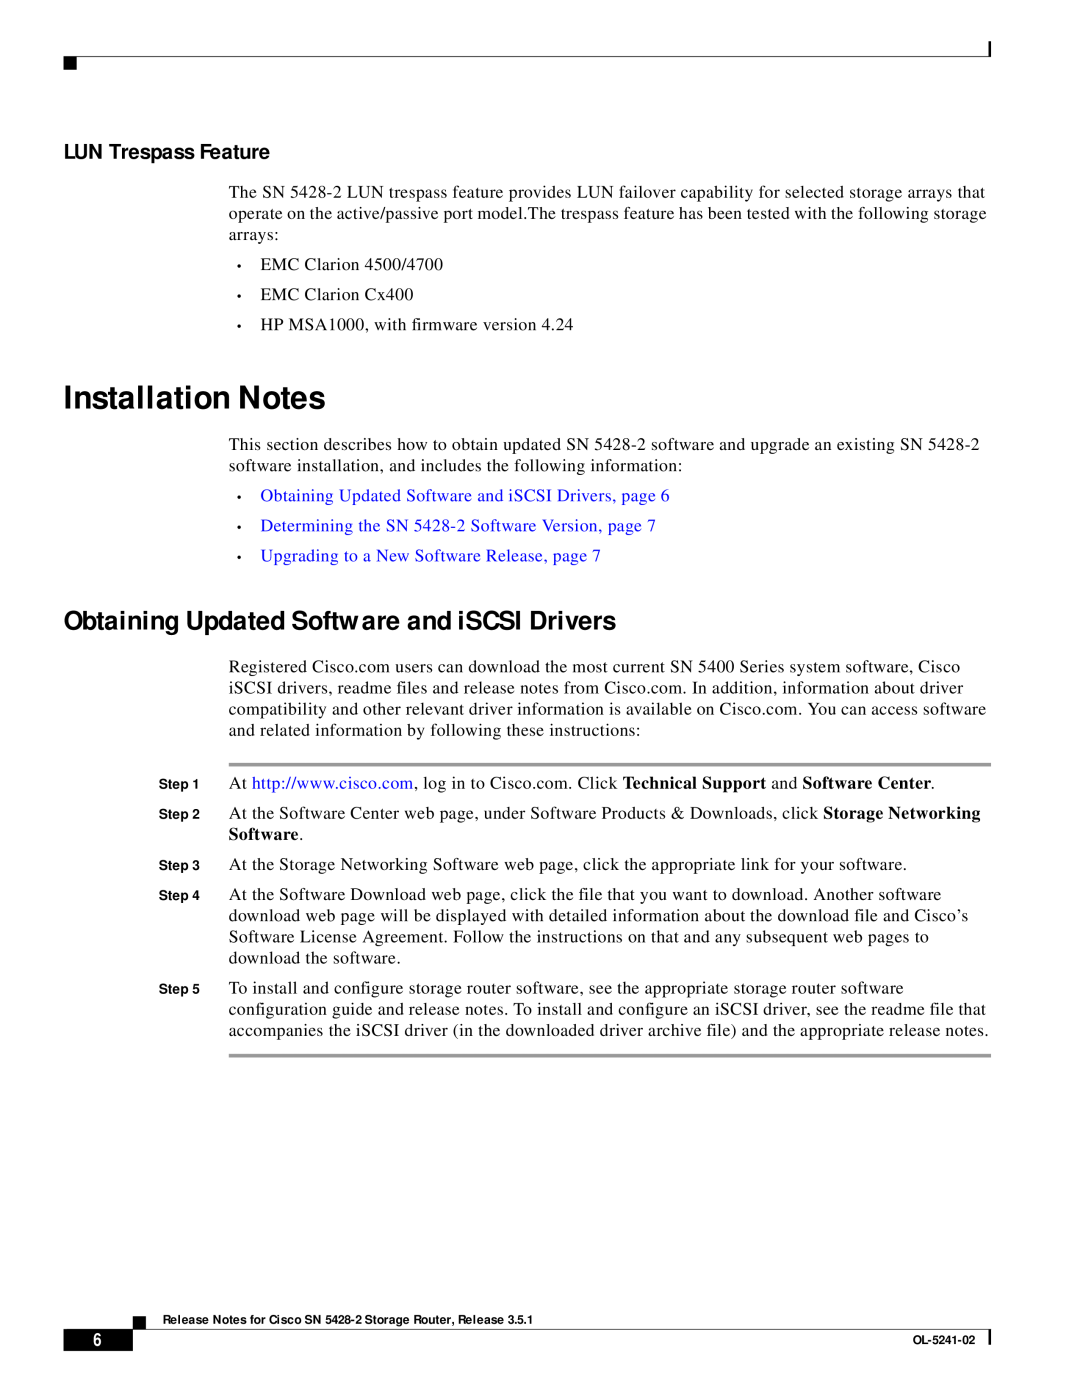 Cisco Systems SN 5428-2 manual Installation Notes, Obtaining Updated Software and iSCSI Drivers, LUN Trespass Feature 